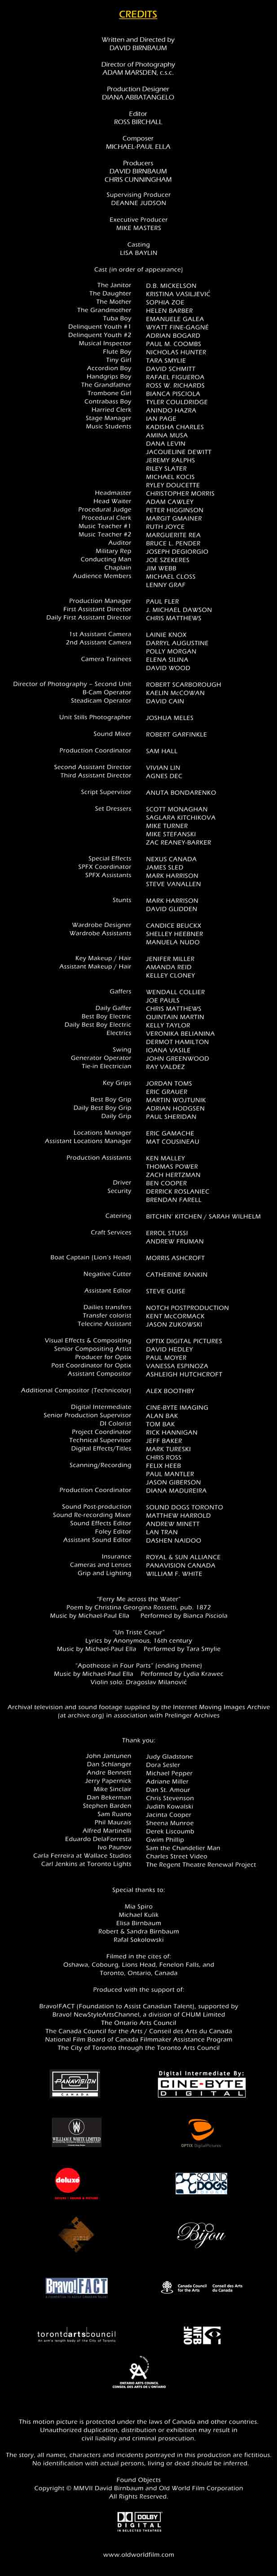 Found Objects End Credits